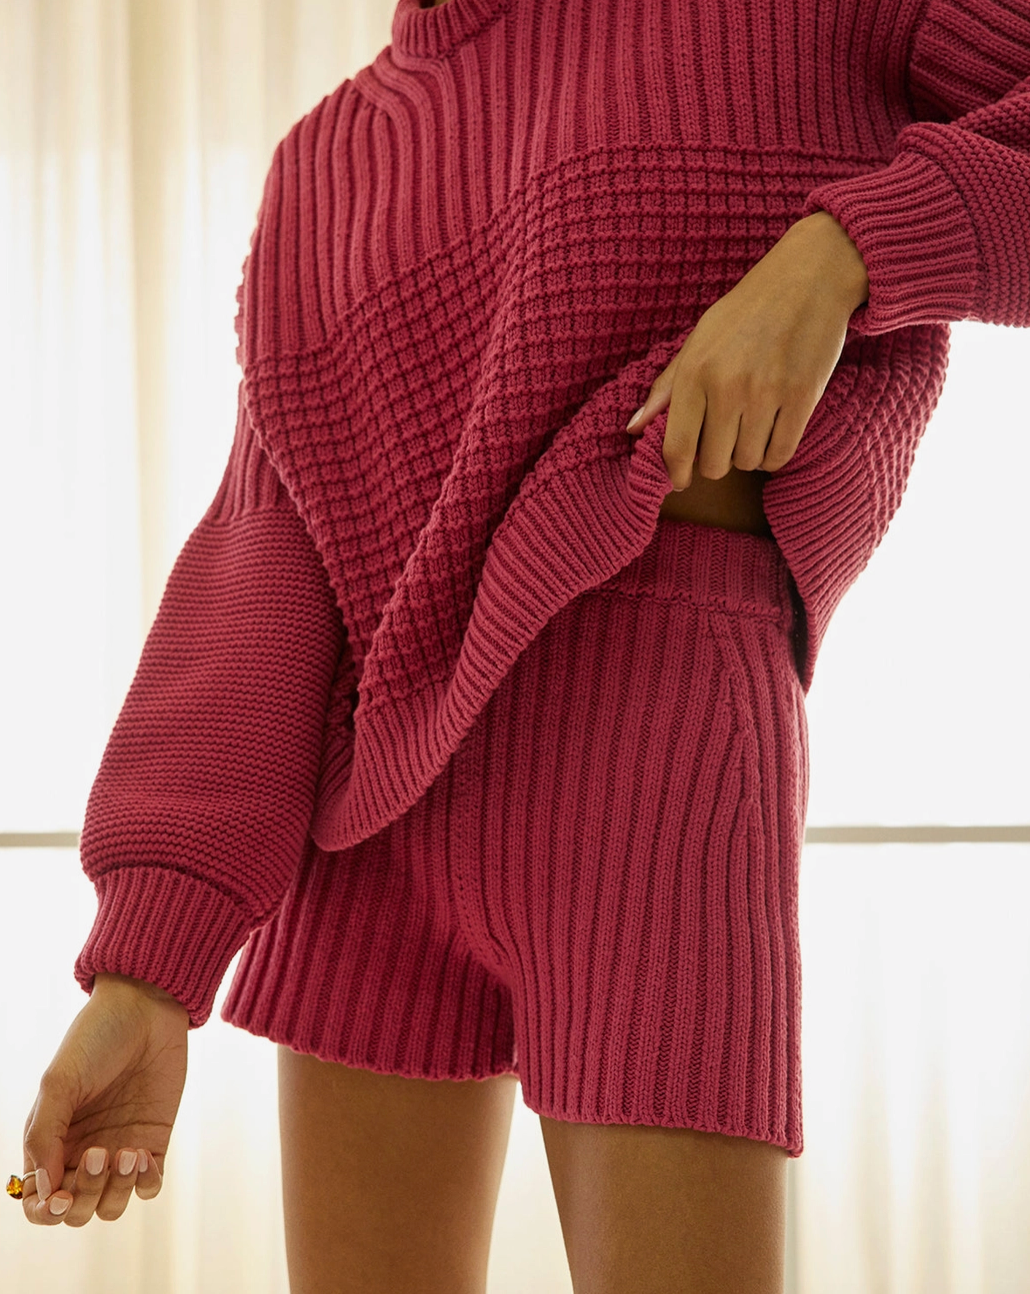 Delcia Sweater - Rhubarb - The Knotty Ones - ONE SIZE